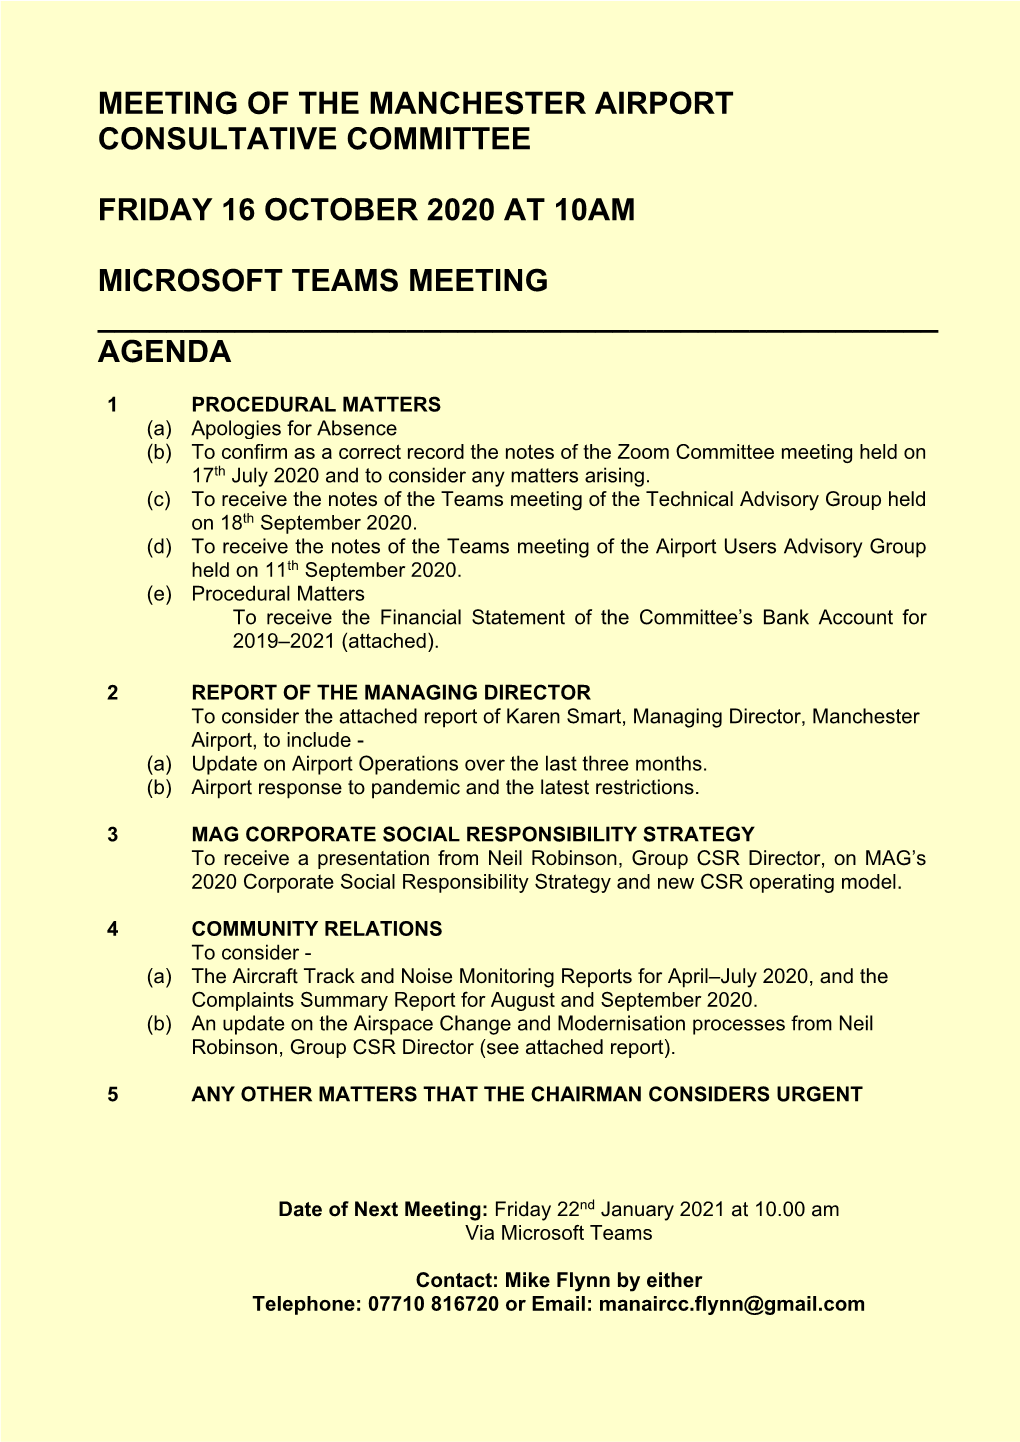 Meeting of the Manchester Airport Consultative Committee Friday 16